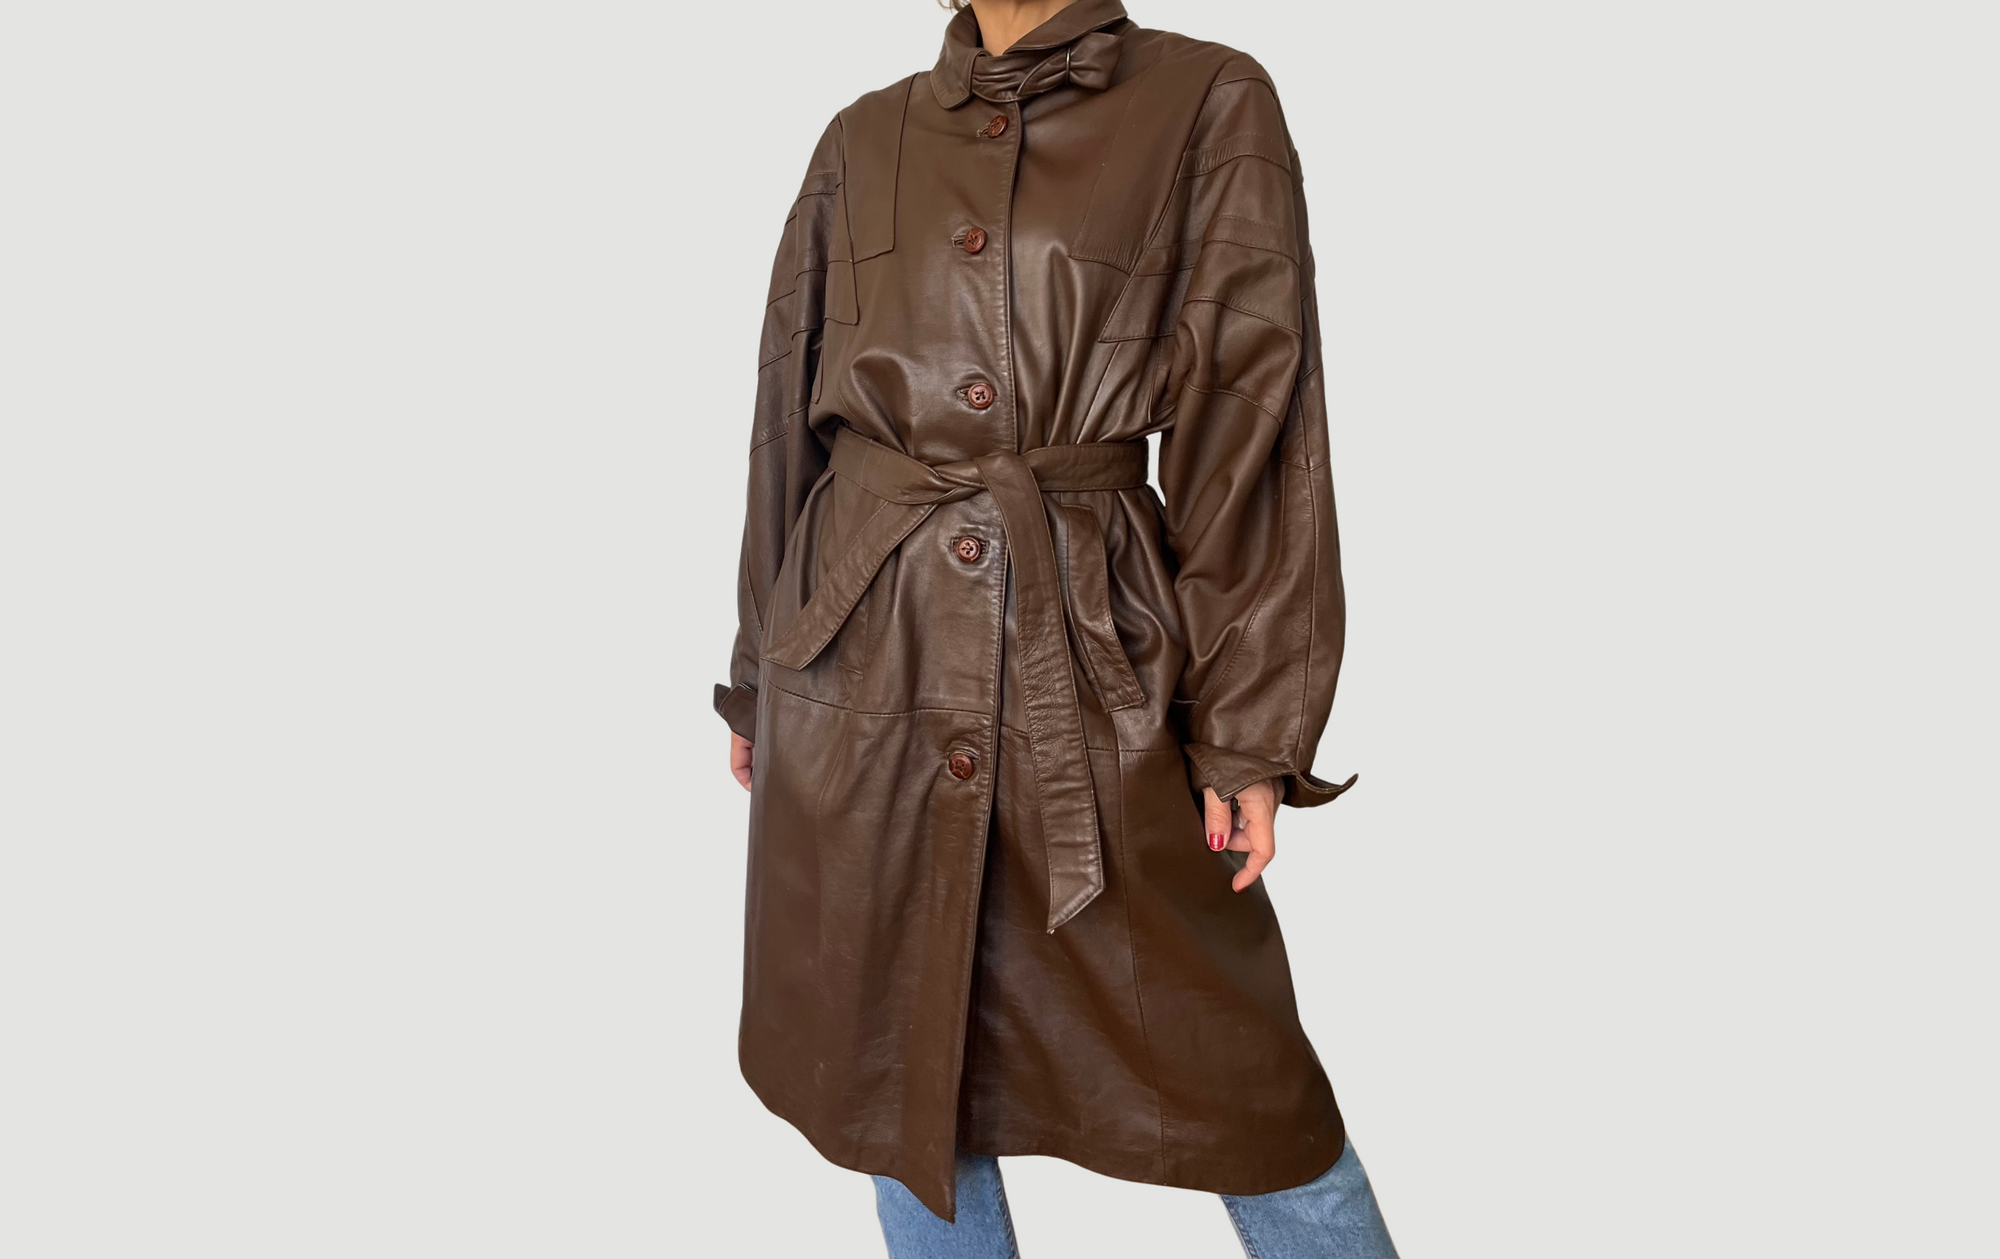 Vintage brown leather Long Trench Coat with belt